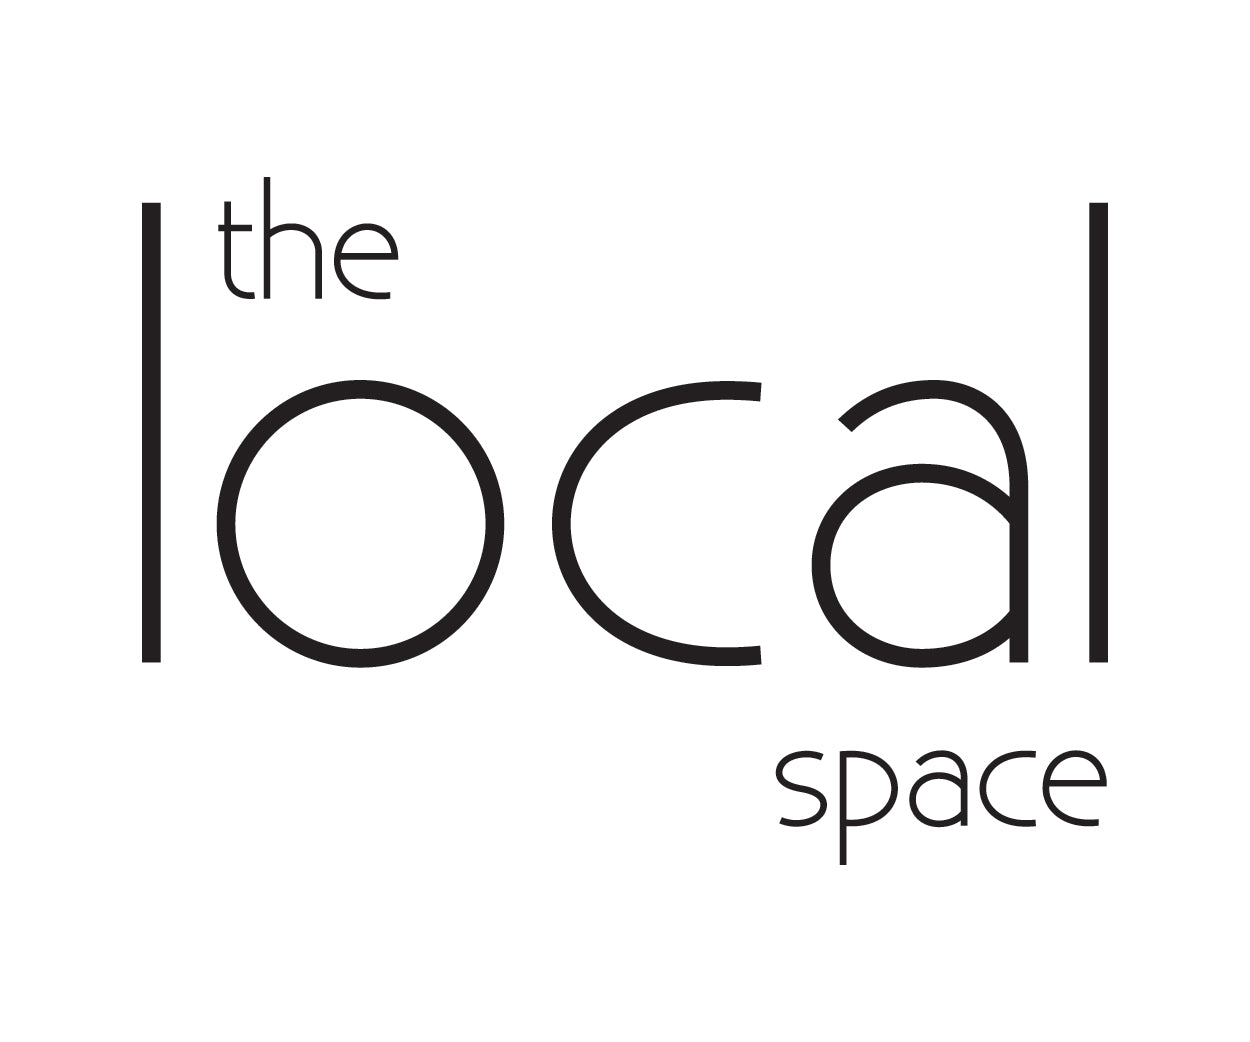 The Local Space